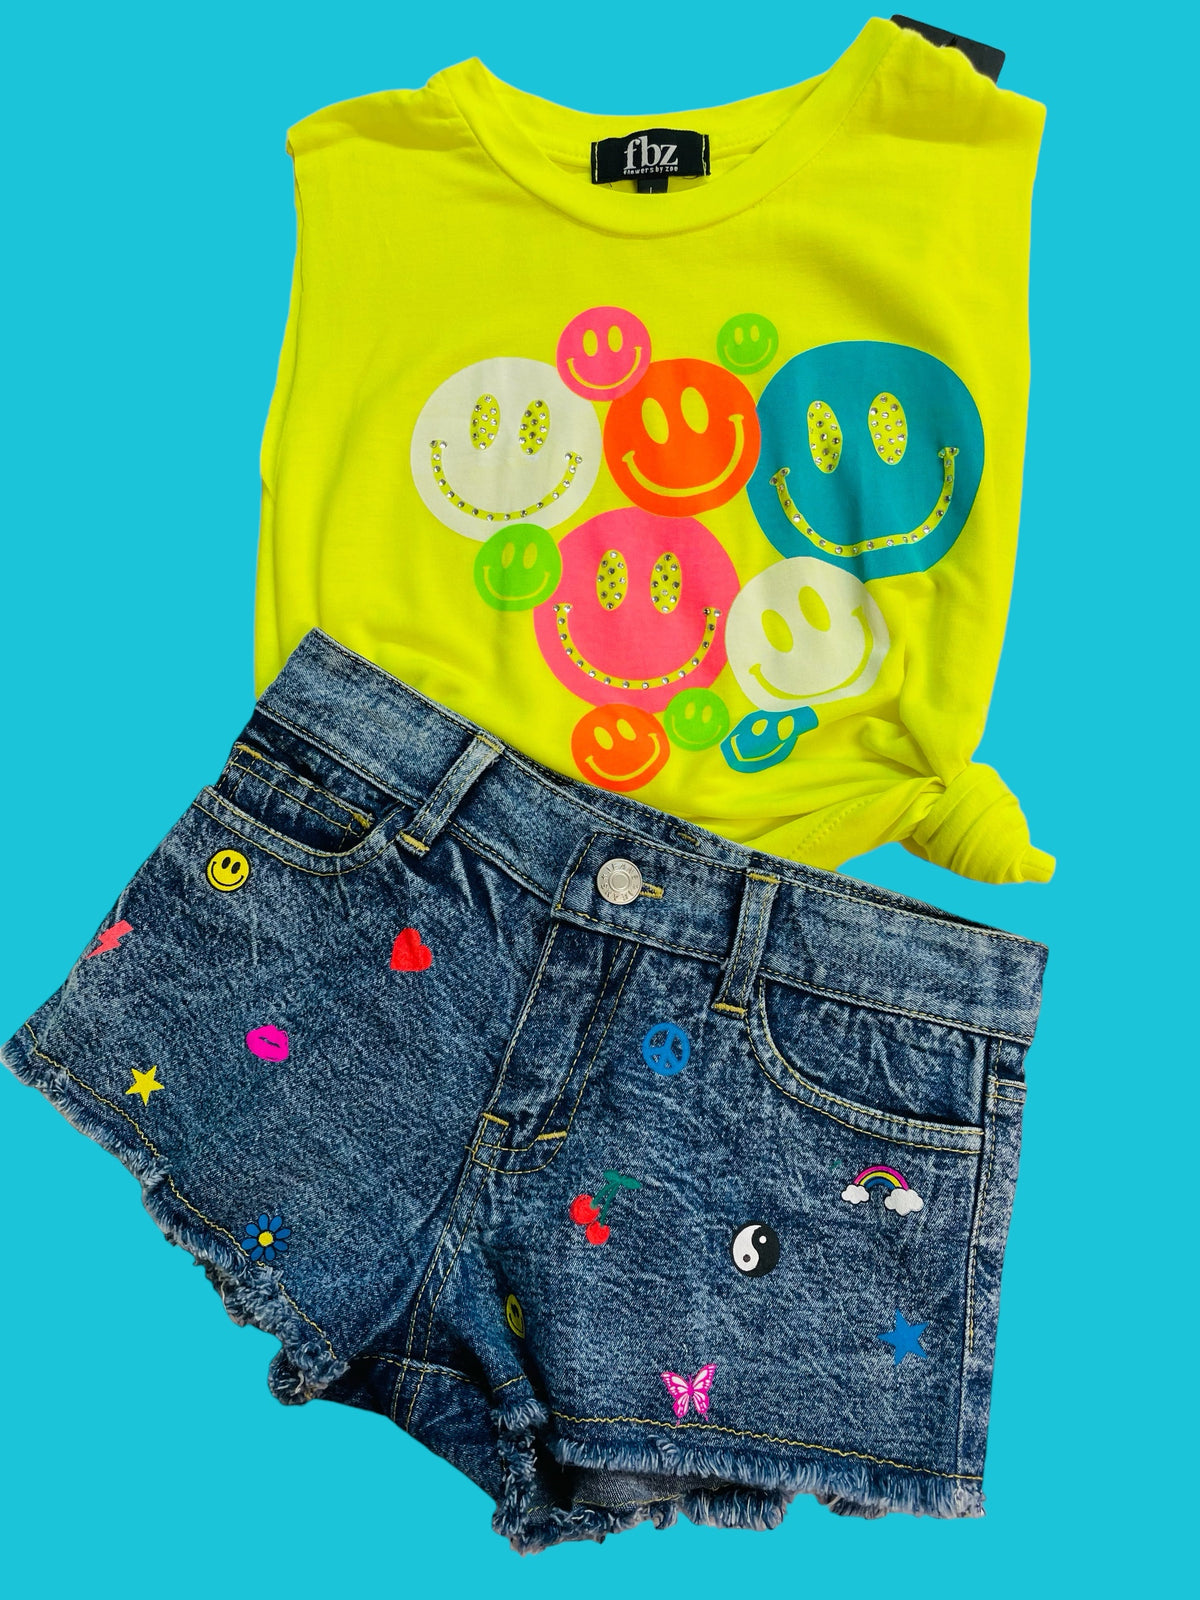 Flowers By Zoe Neon Yellow Tee With Smiley&#39;s